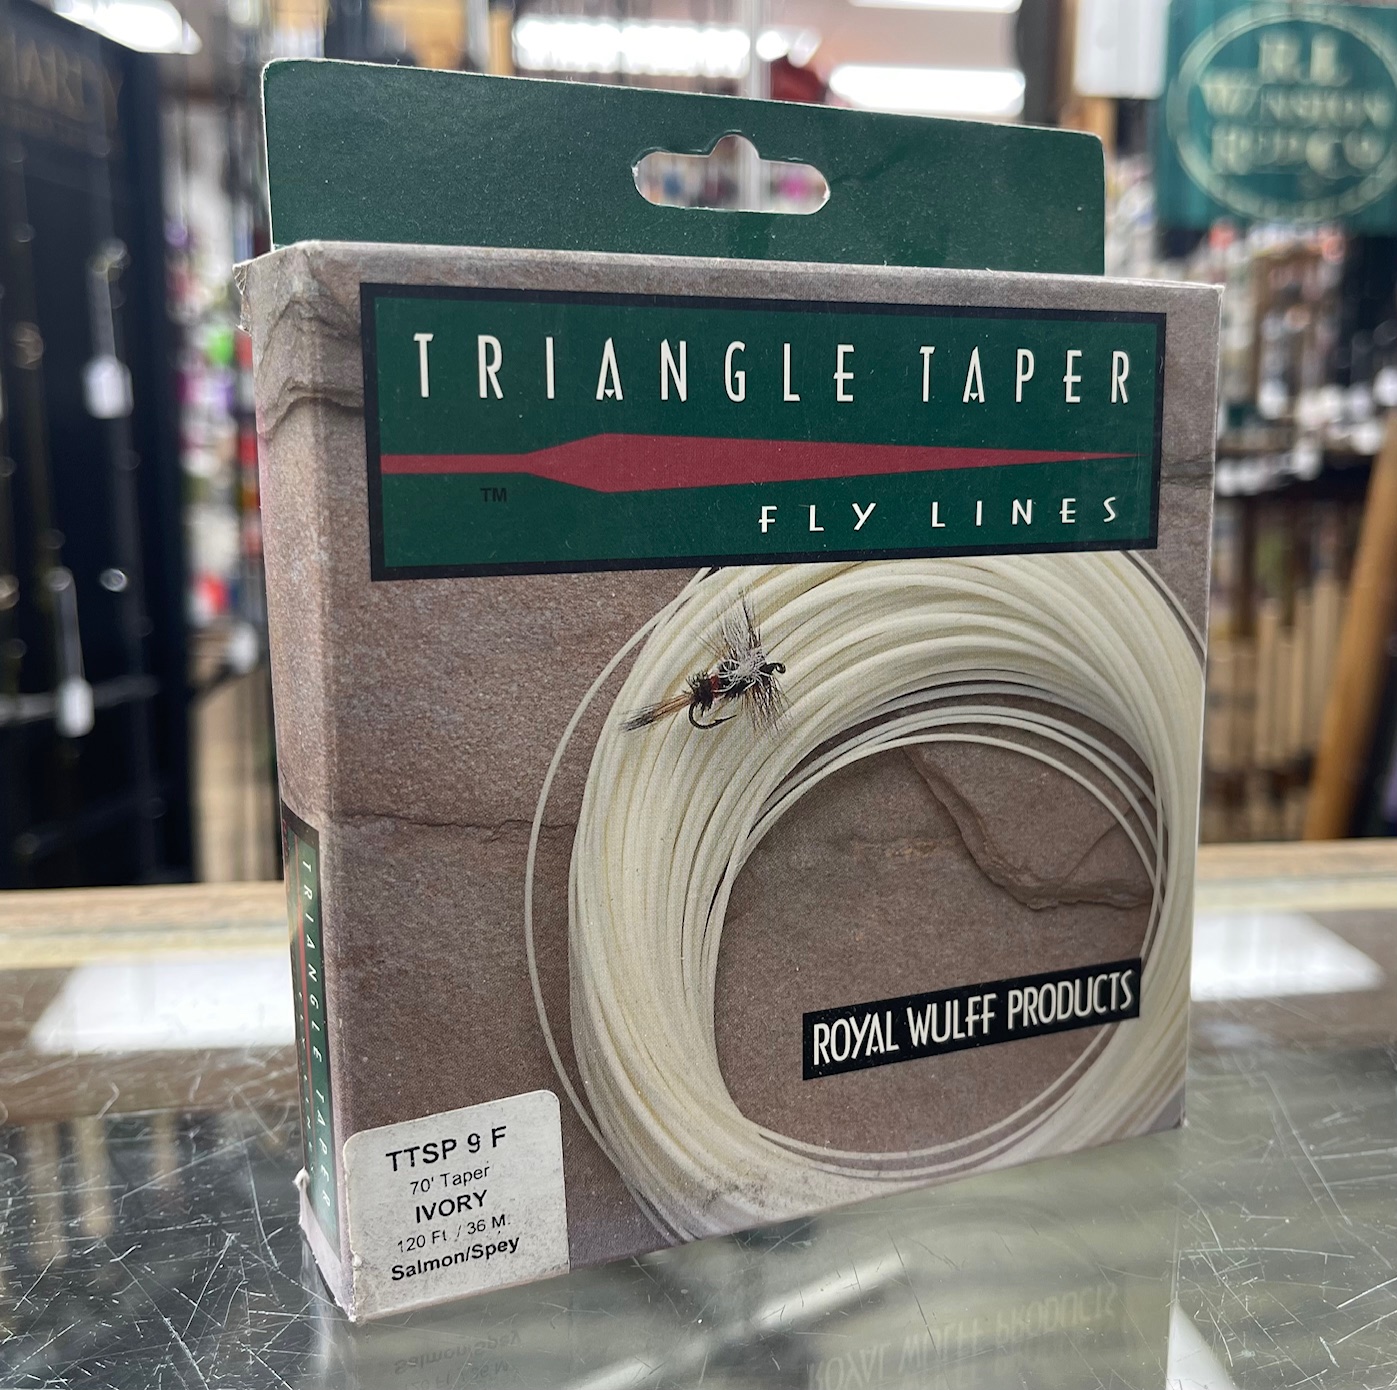 Royal Wulff Triangle Taper Salmon/Spey - TTSP-10-ST - 14' Sink Tip/80ft Taper, 120ft